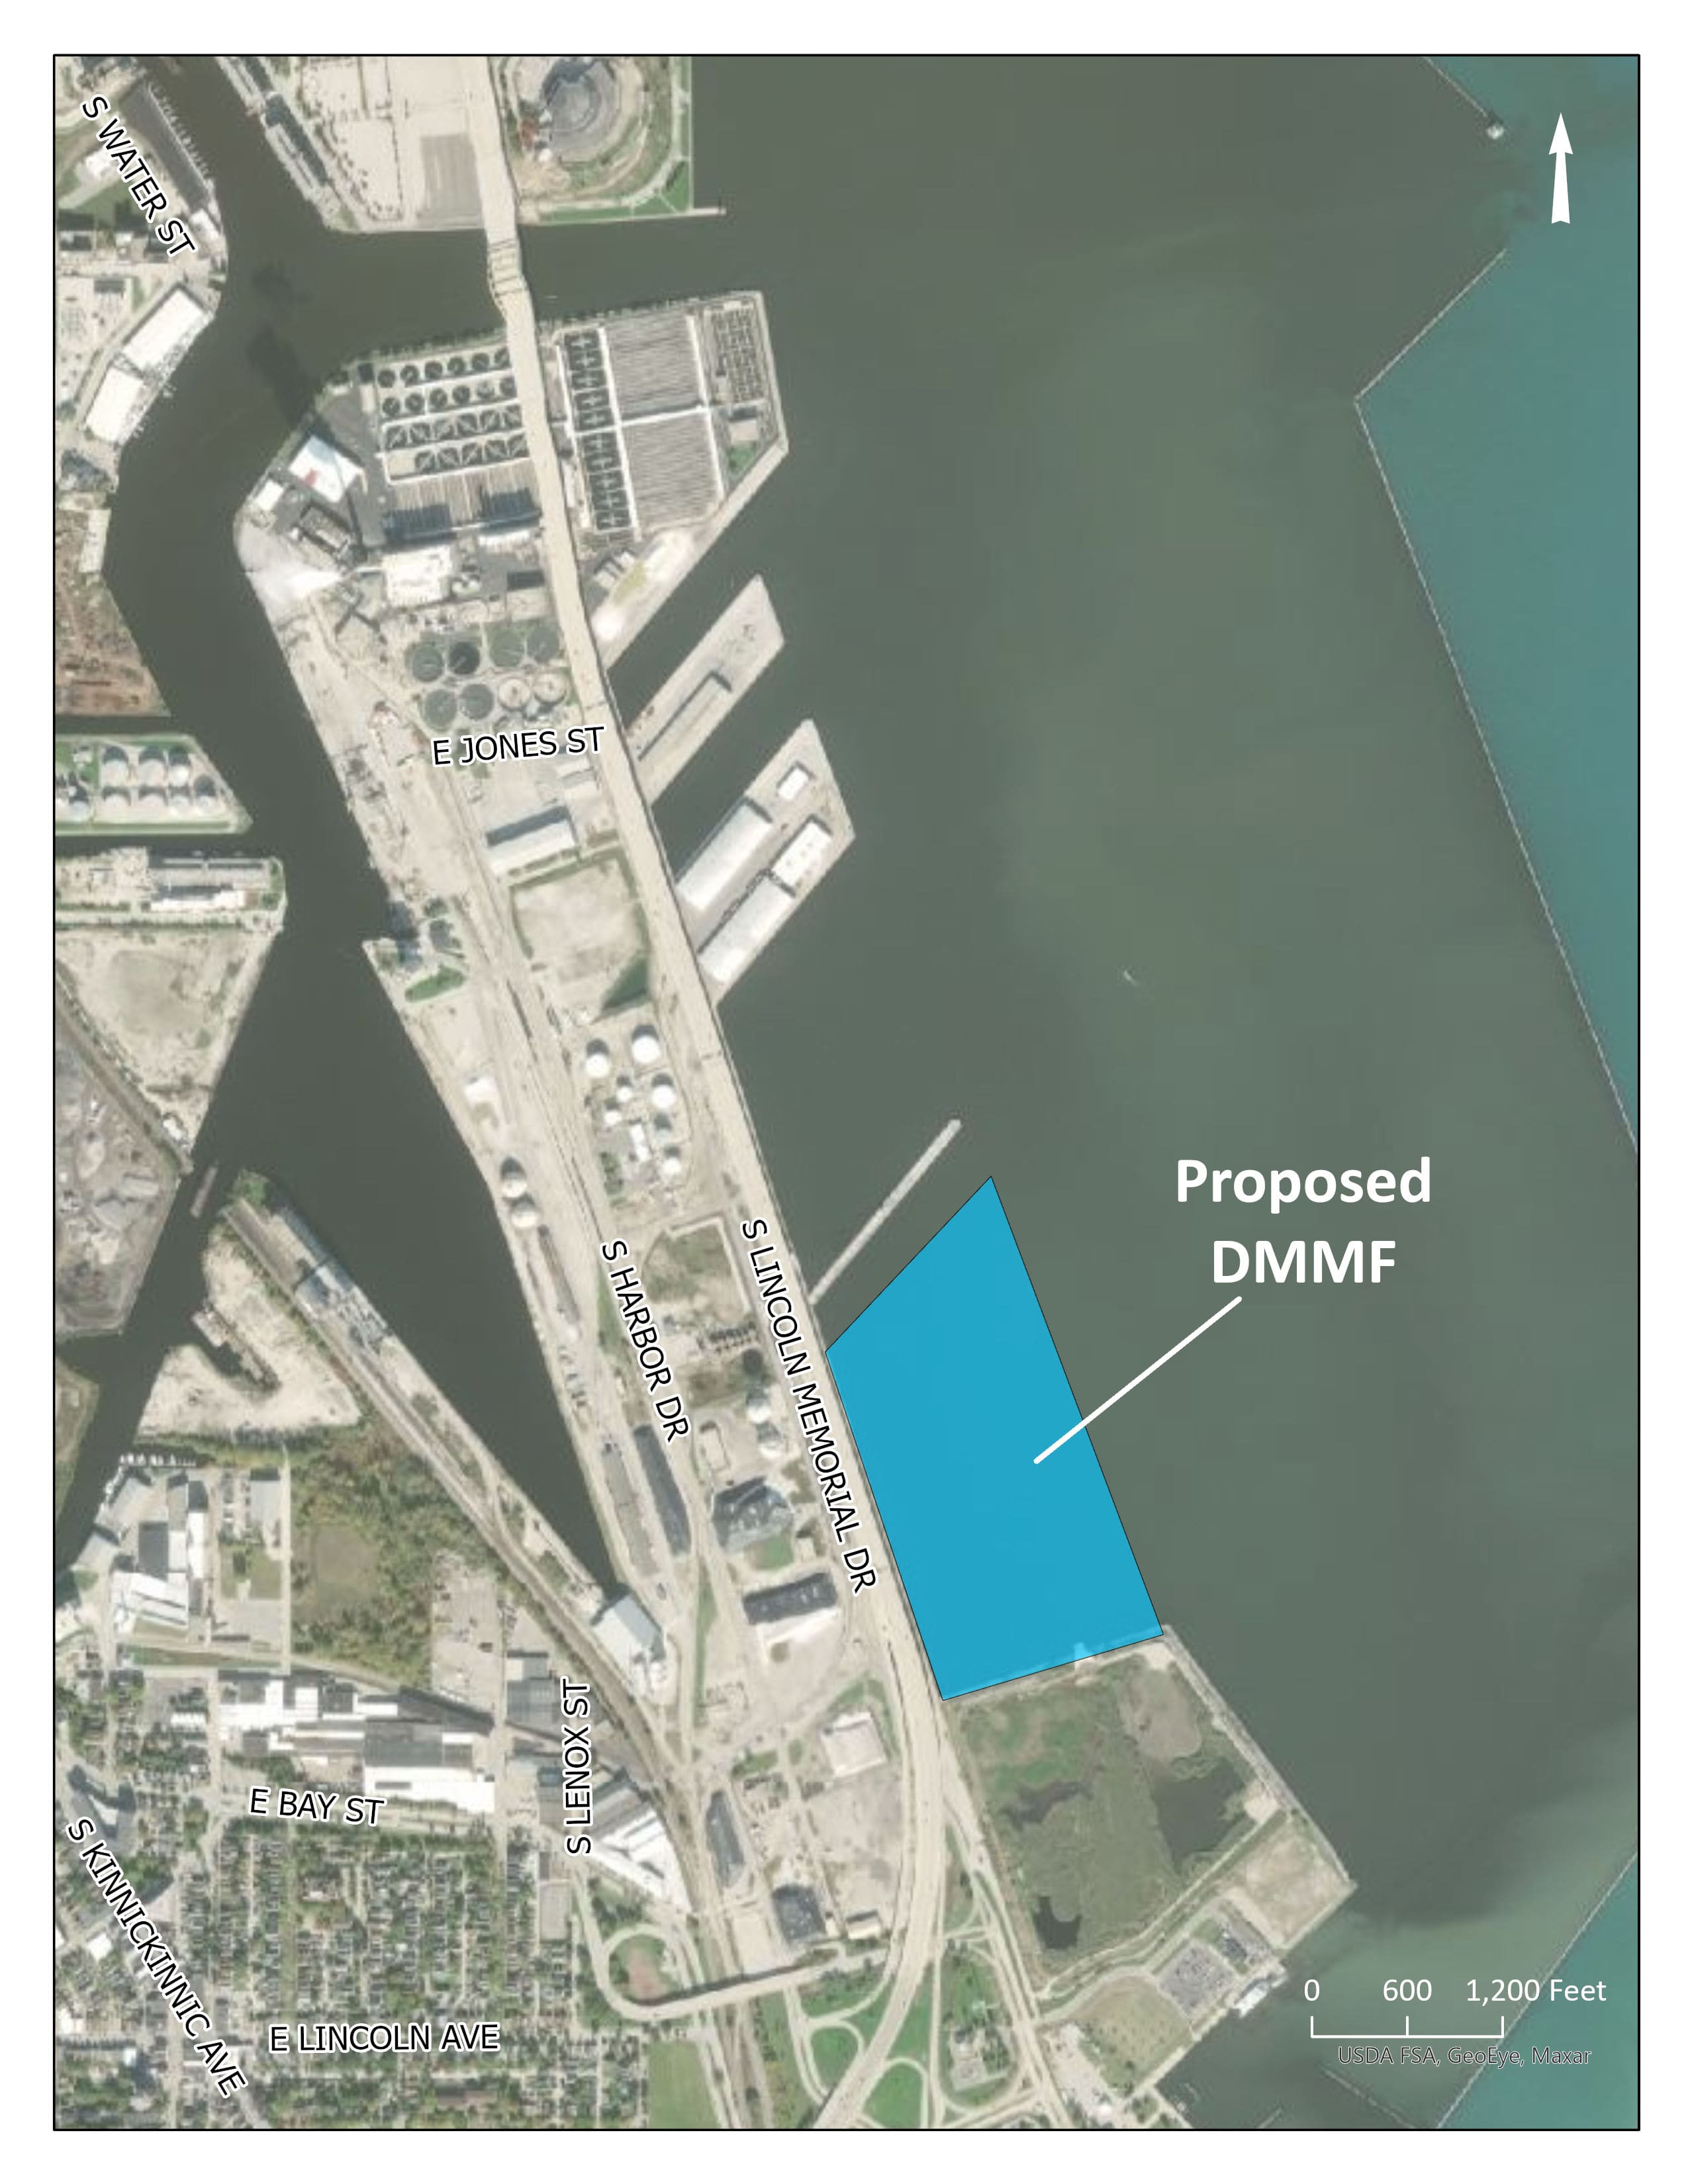 dredged materials facility map